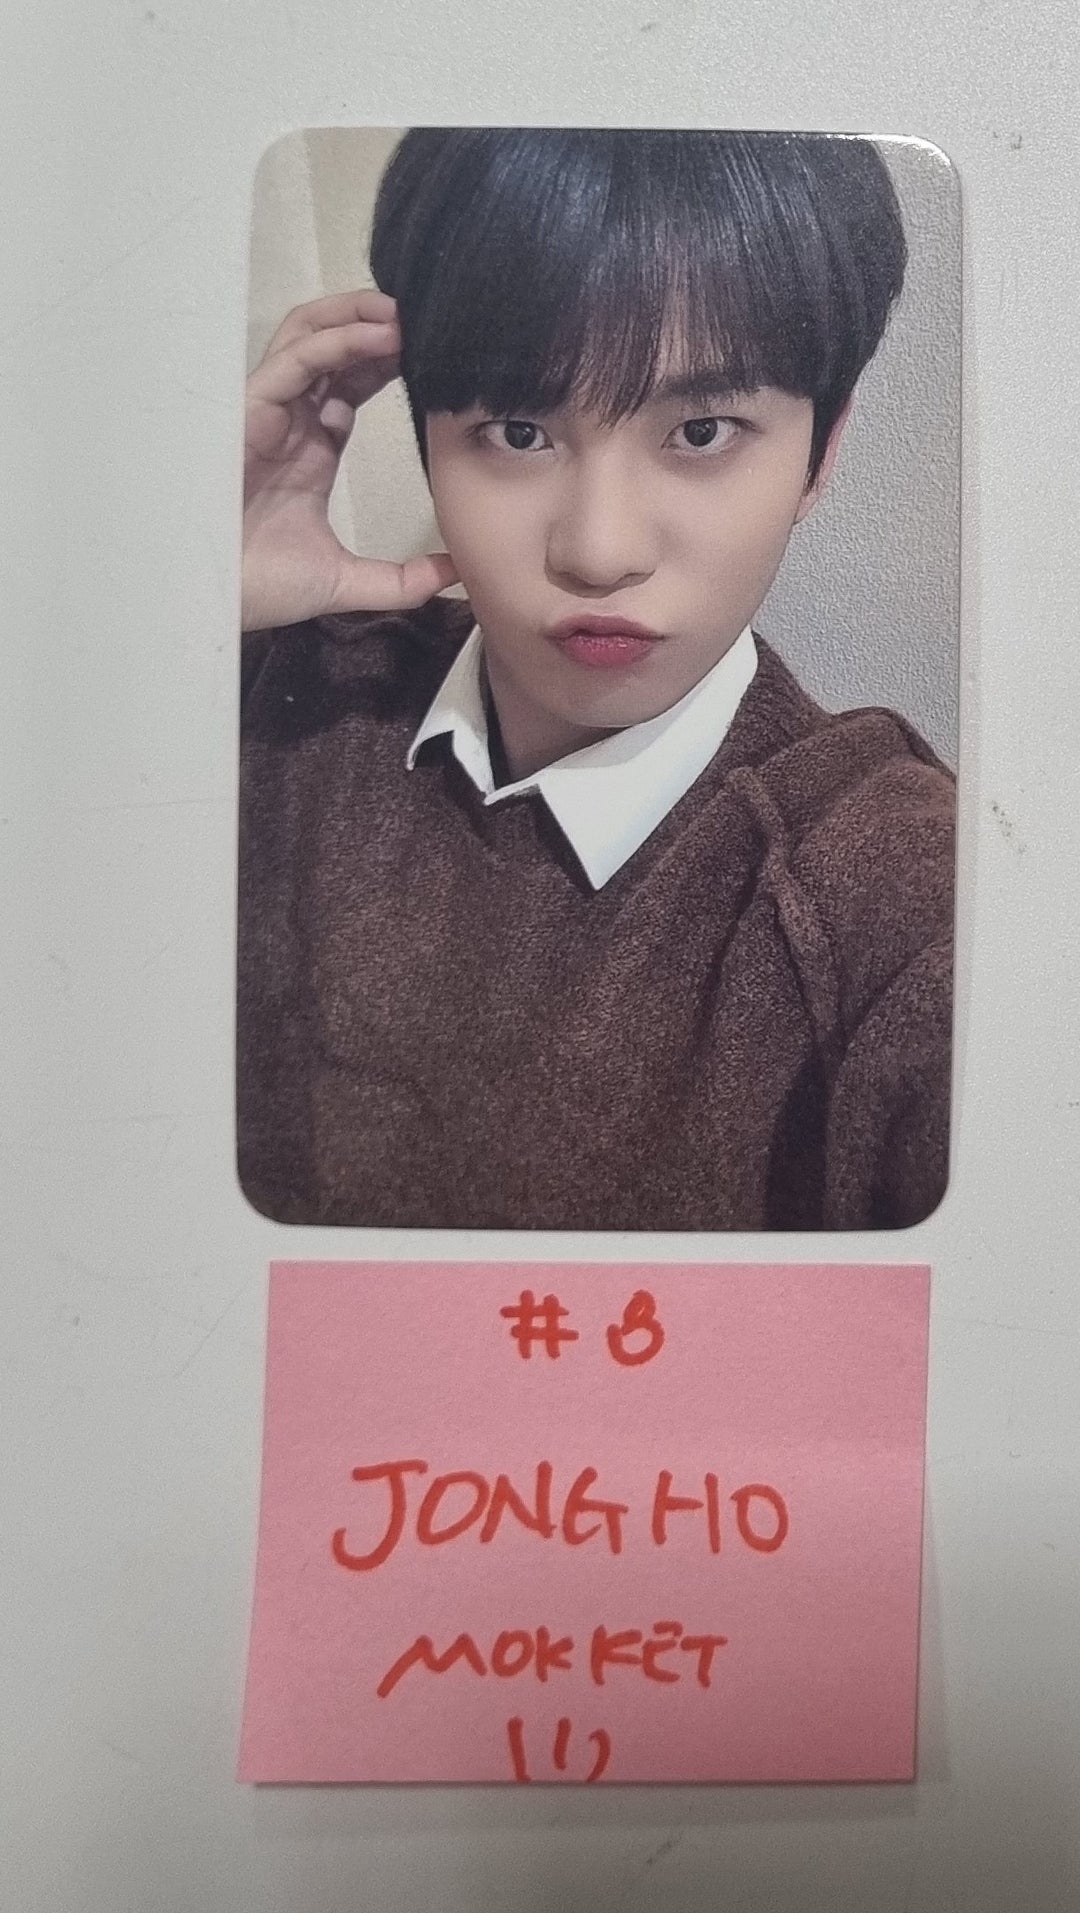 Ateez - "The World Ep.Fin : Will" Mokket Shop Fansign Event Photocard Round 2 [24.1.26]